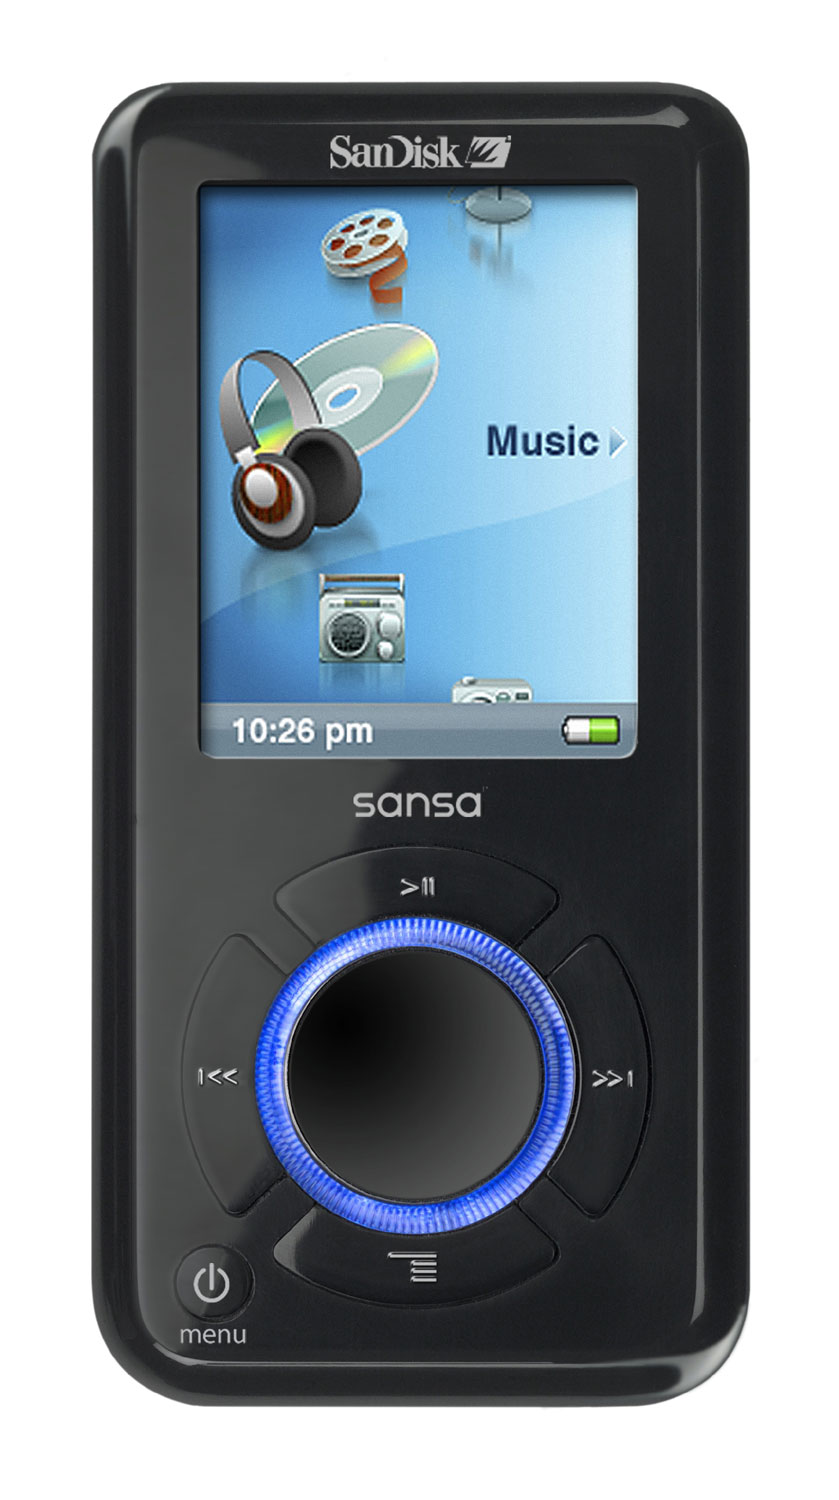   Players on Best Mp3 Players   Best Informative Blog About Tablet Computer   Best